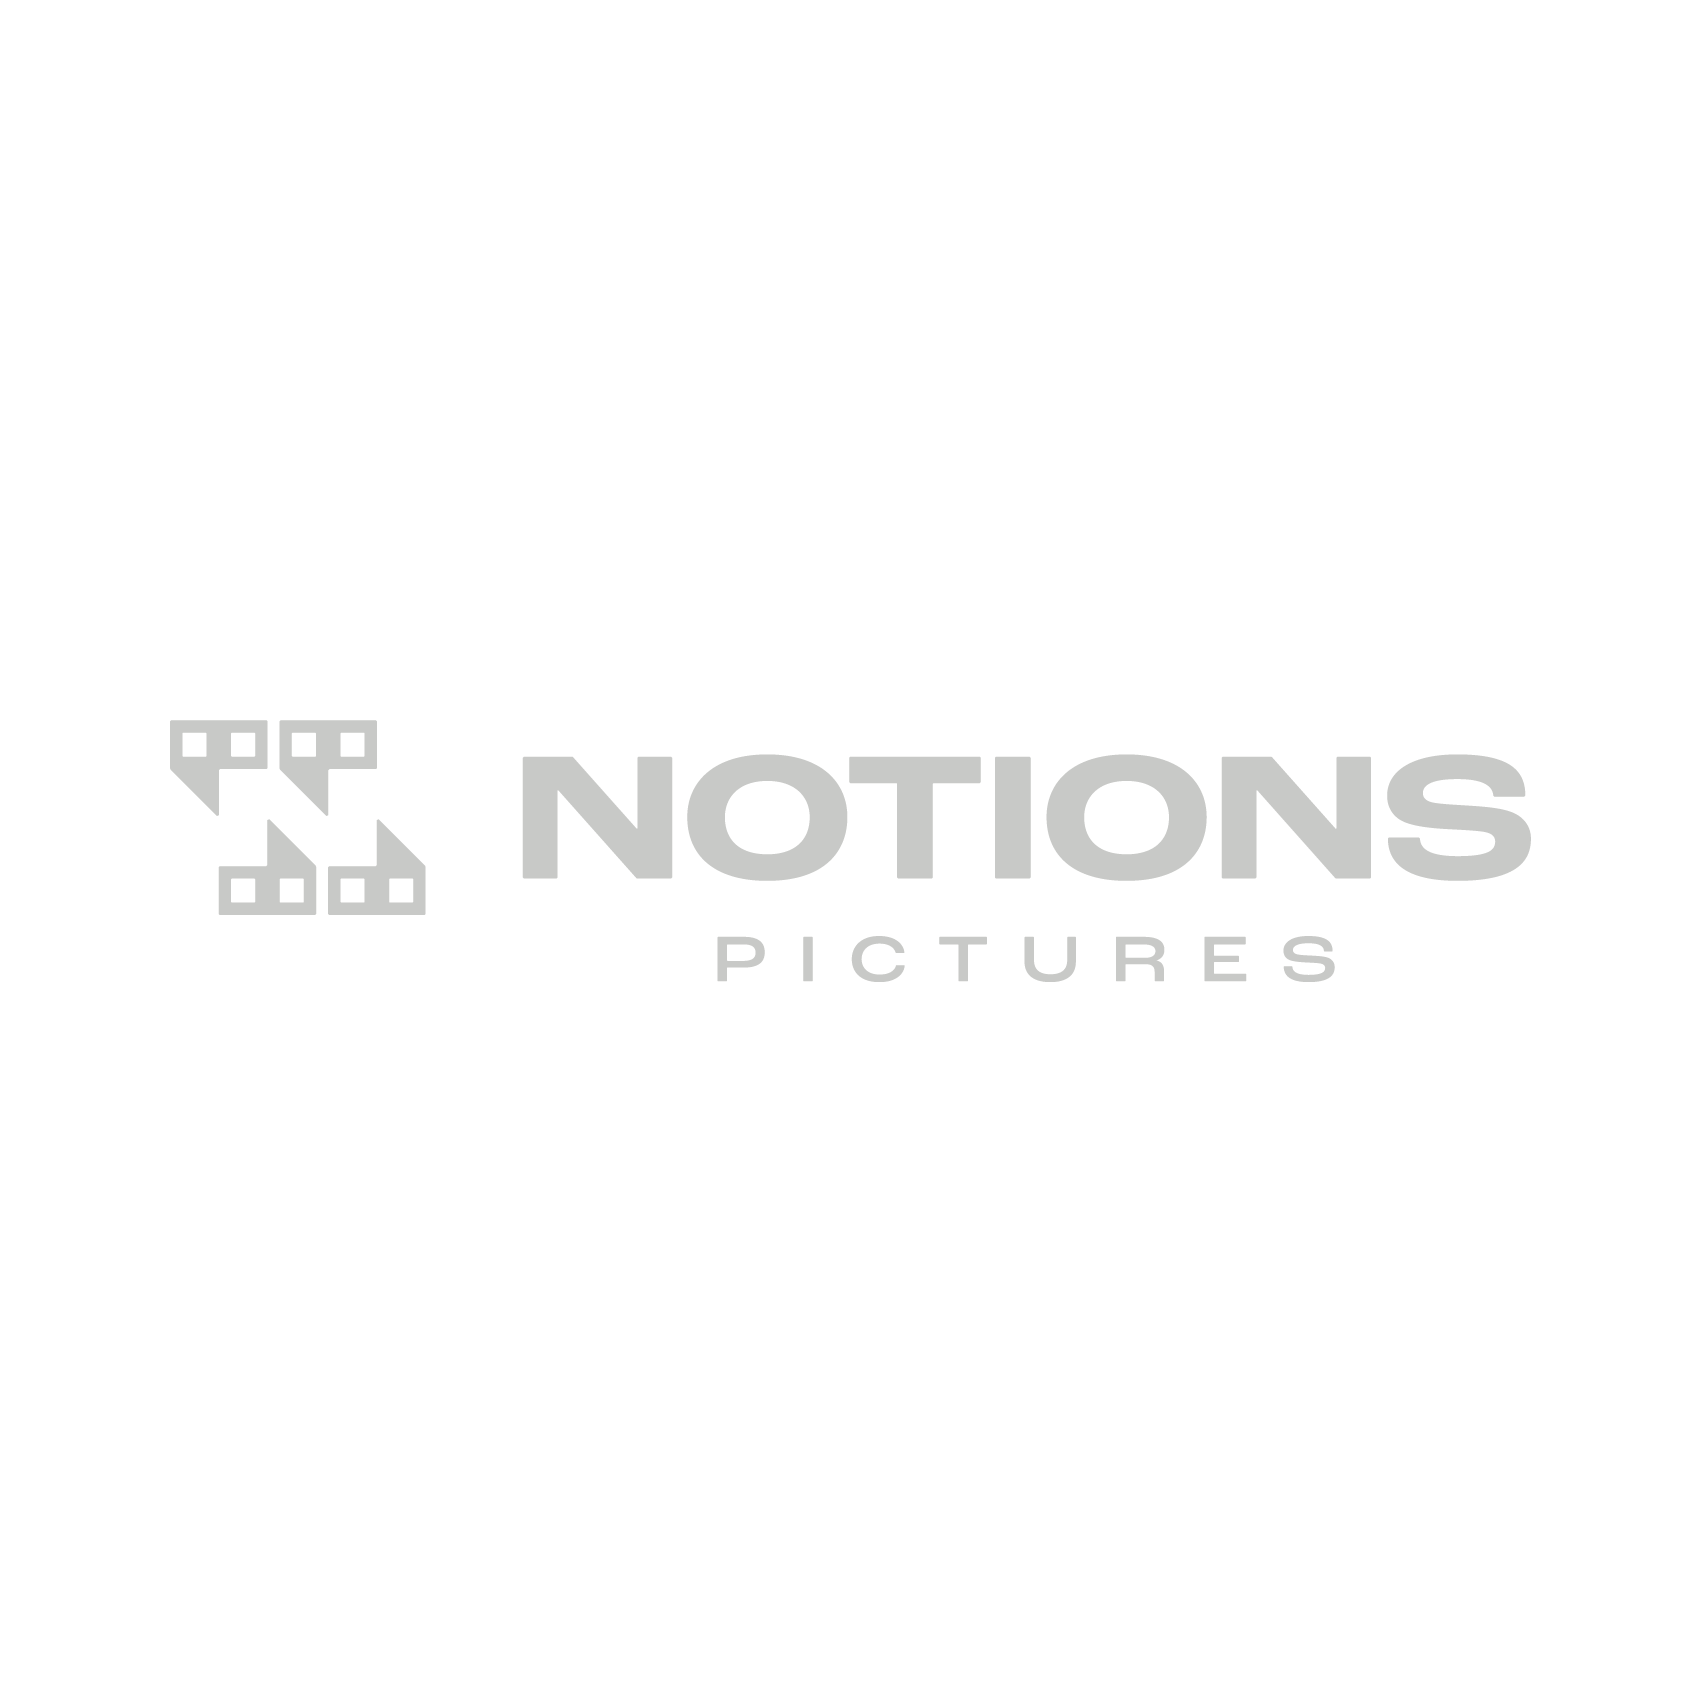 Notions Pictures